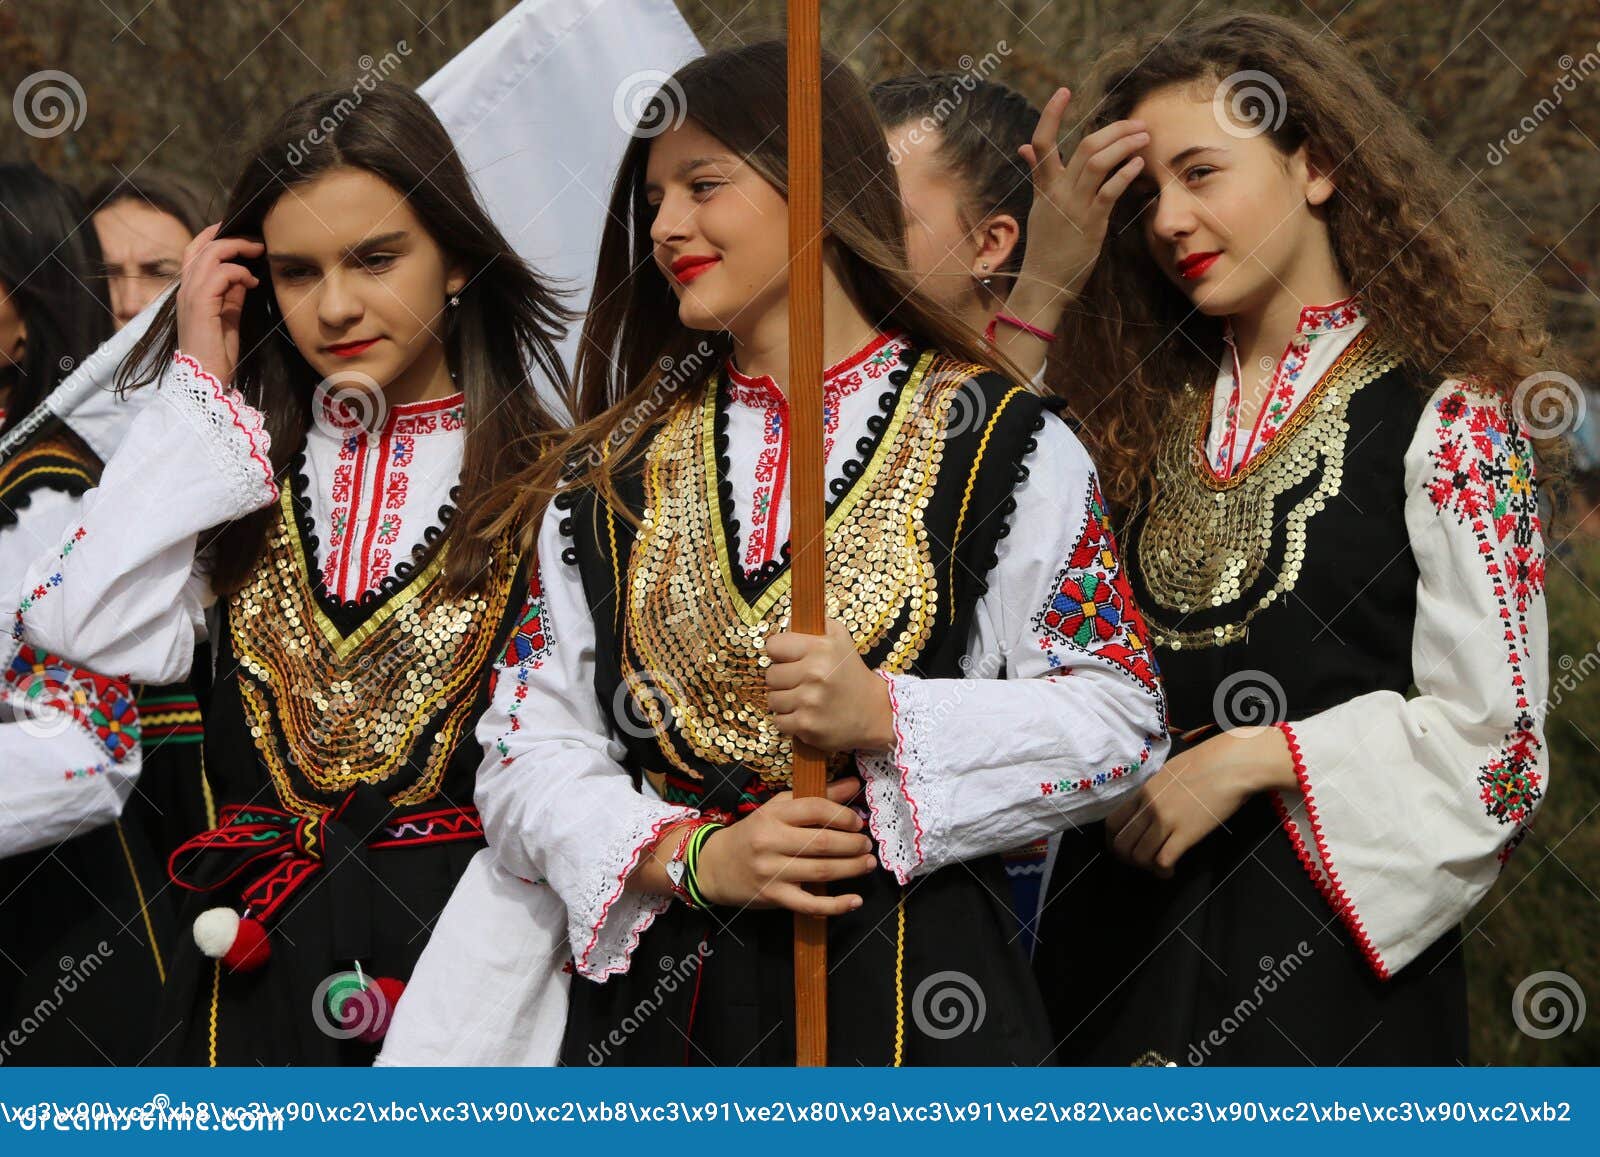 People in Traditional Authentic Folklore Costume Editorial Photo ...